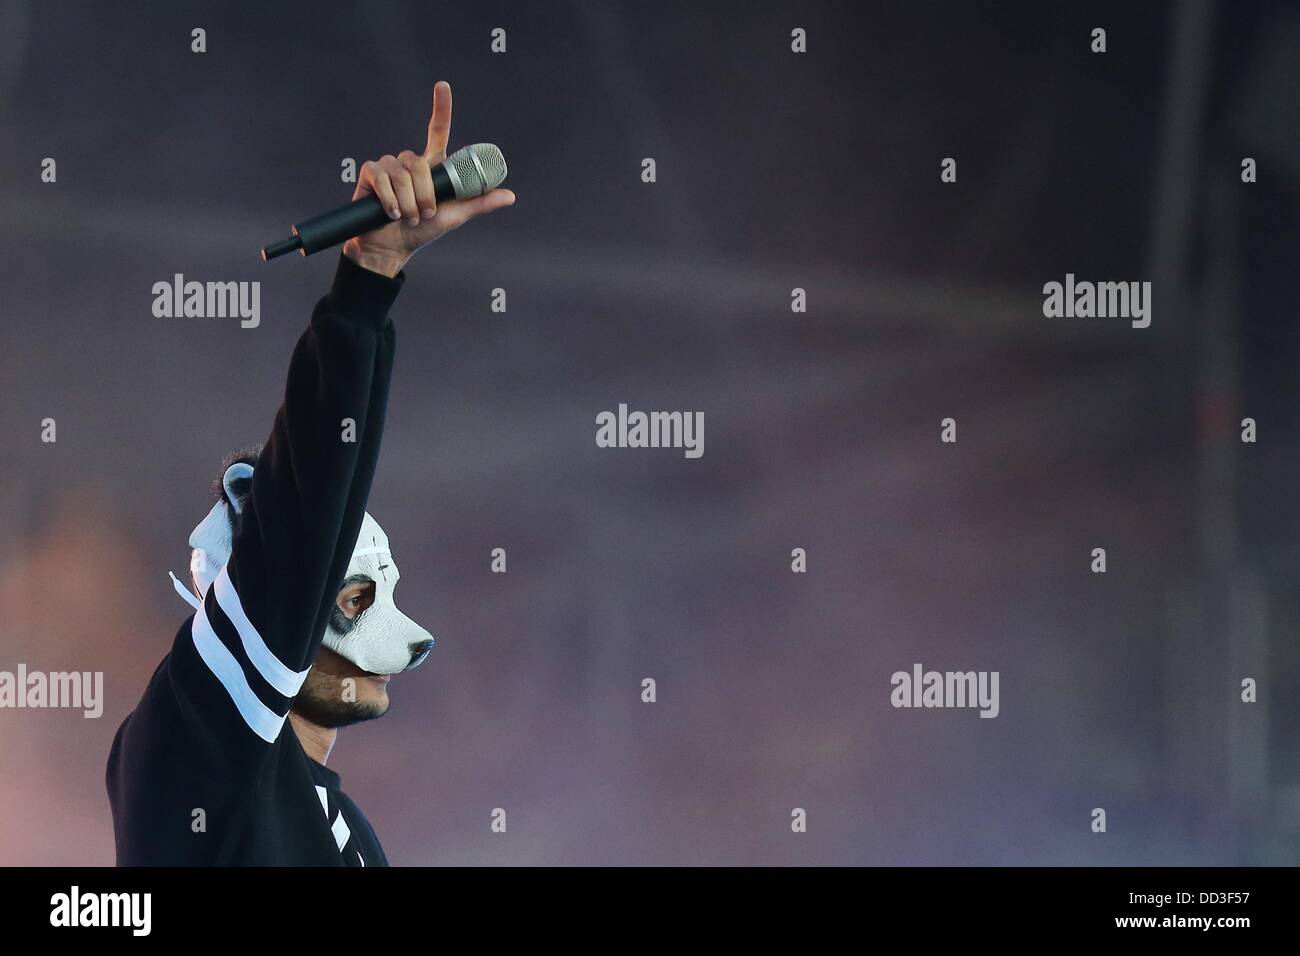 German rapper Cro gives a concert at the Trabrennbahn in Hamburg, Germany, 24 August 2013. Photo: Malte Christians Stock Photo